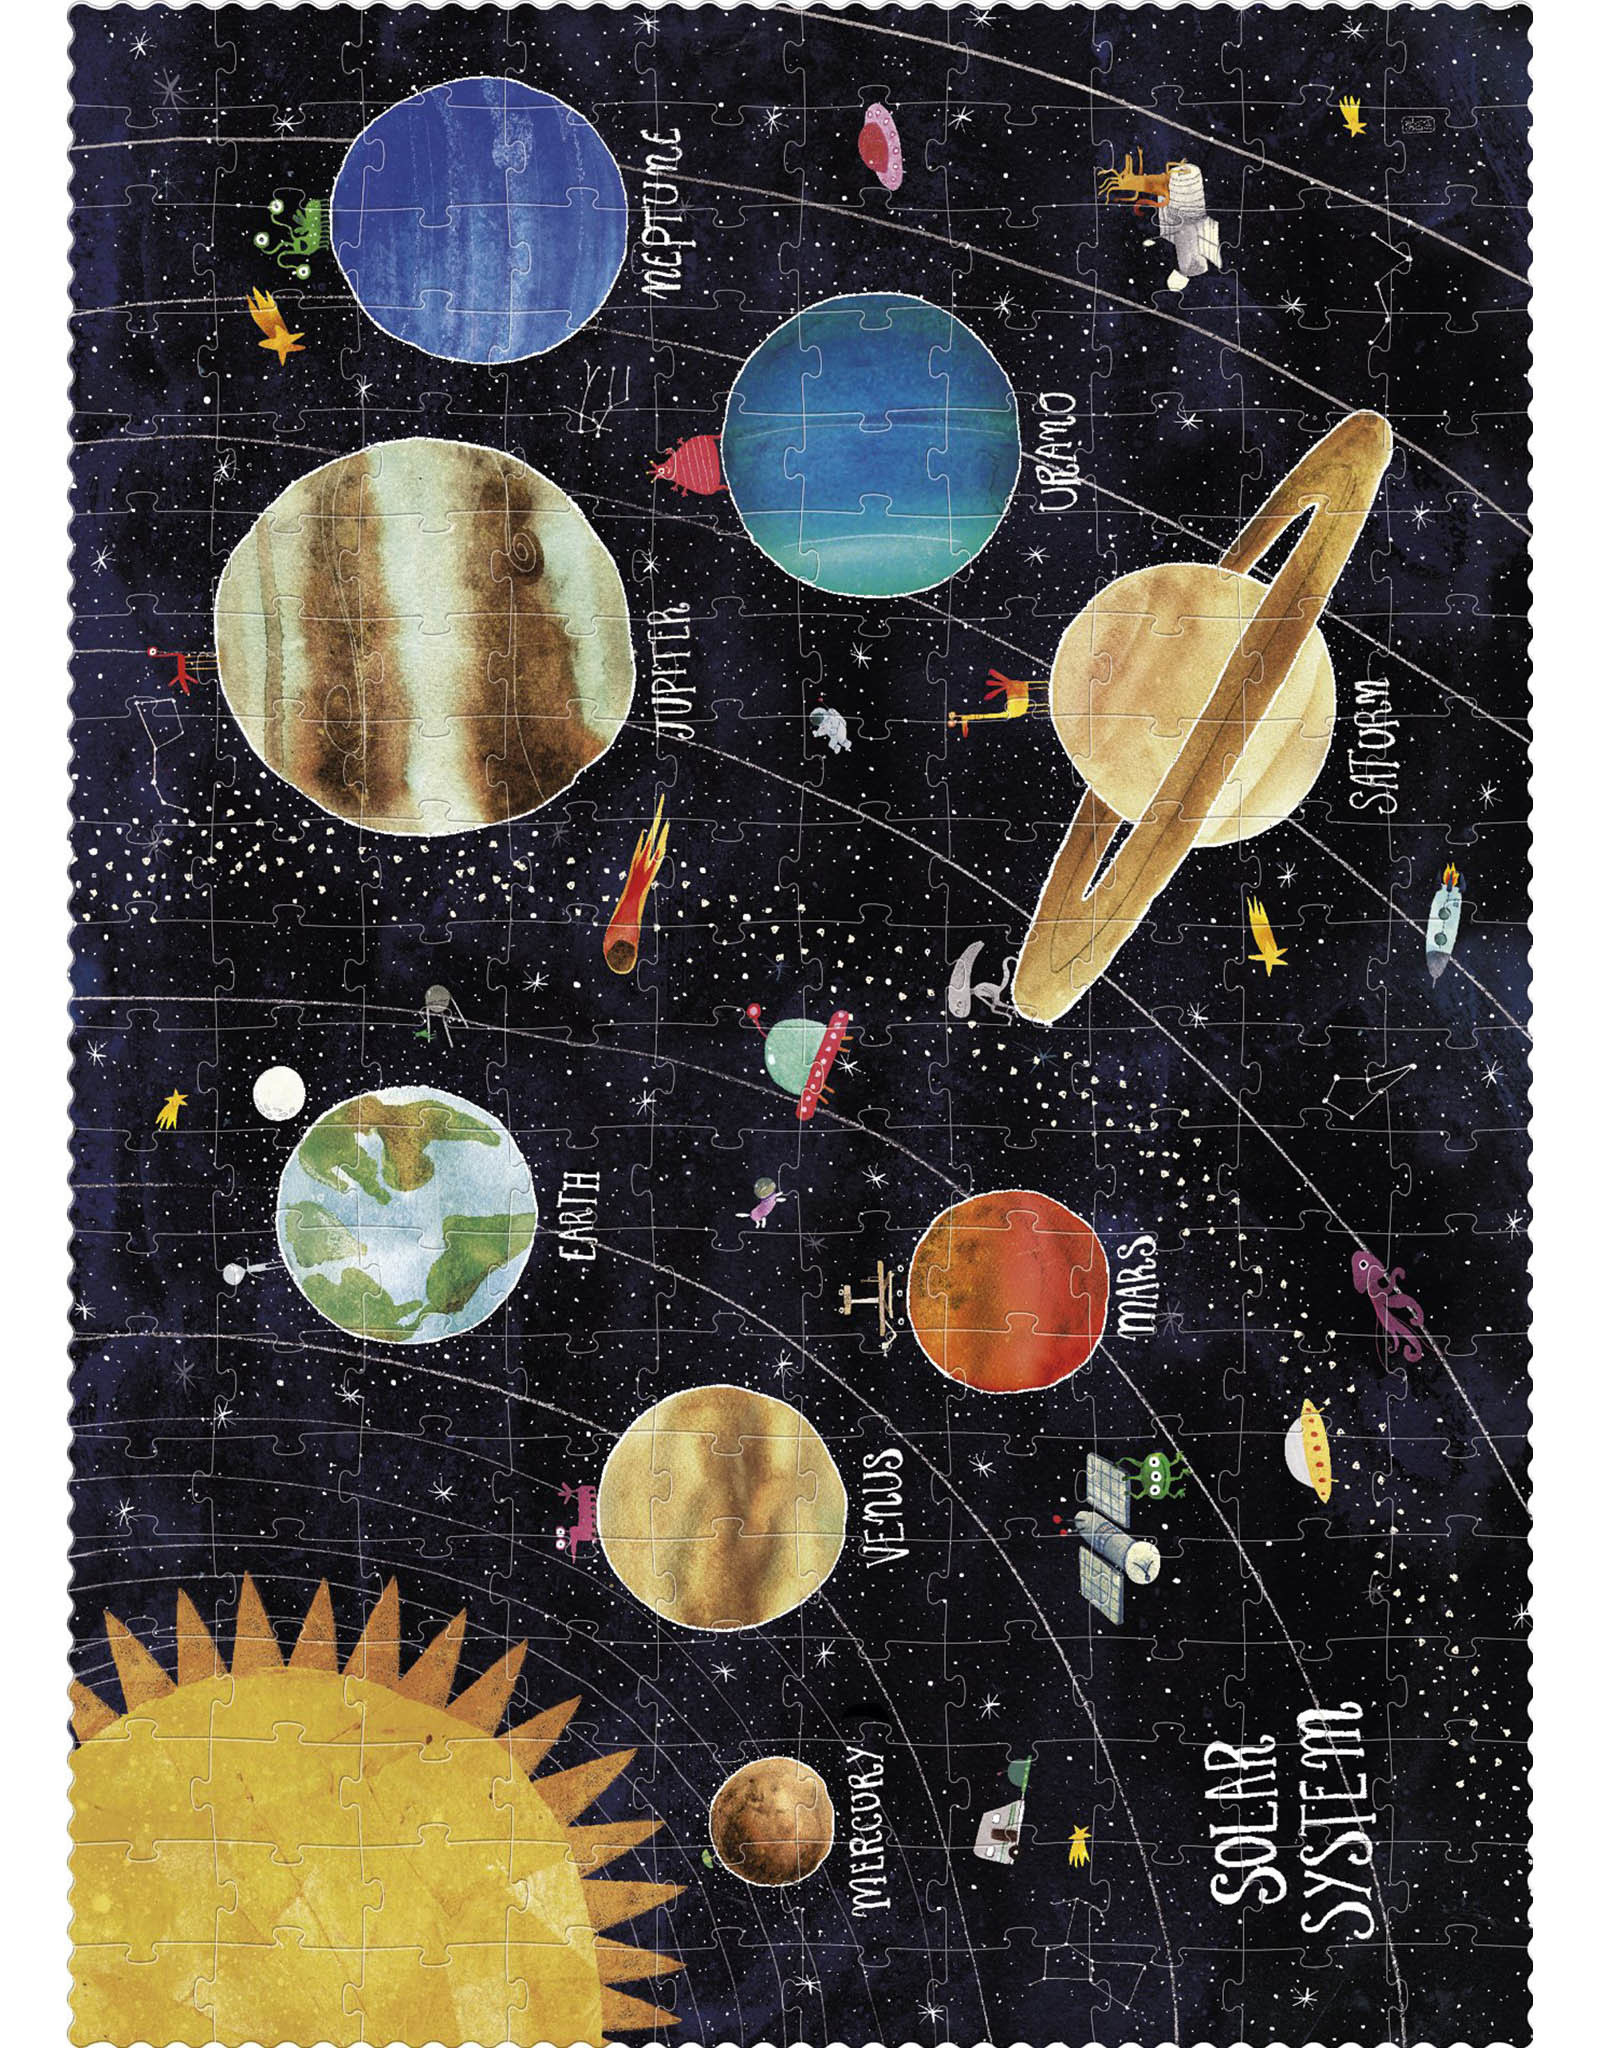 Londji Discover the Planets Glow in the Dark 200 Piece Puzzle by Londji